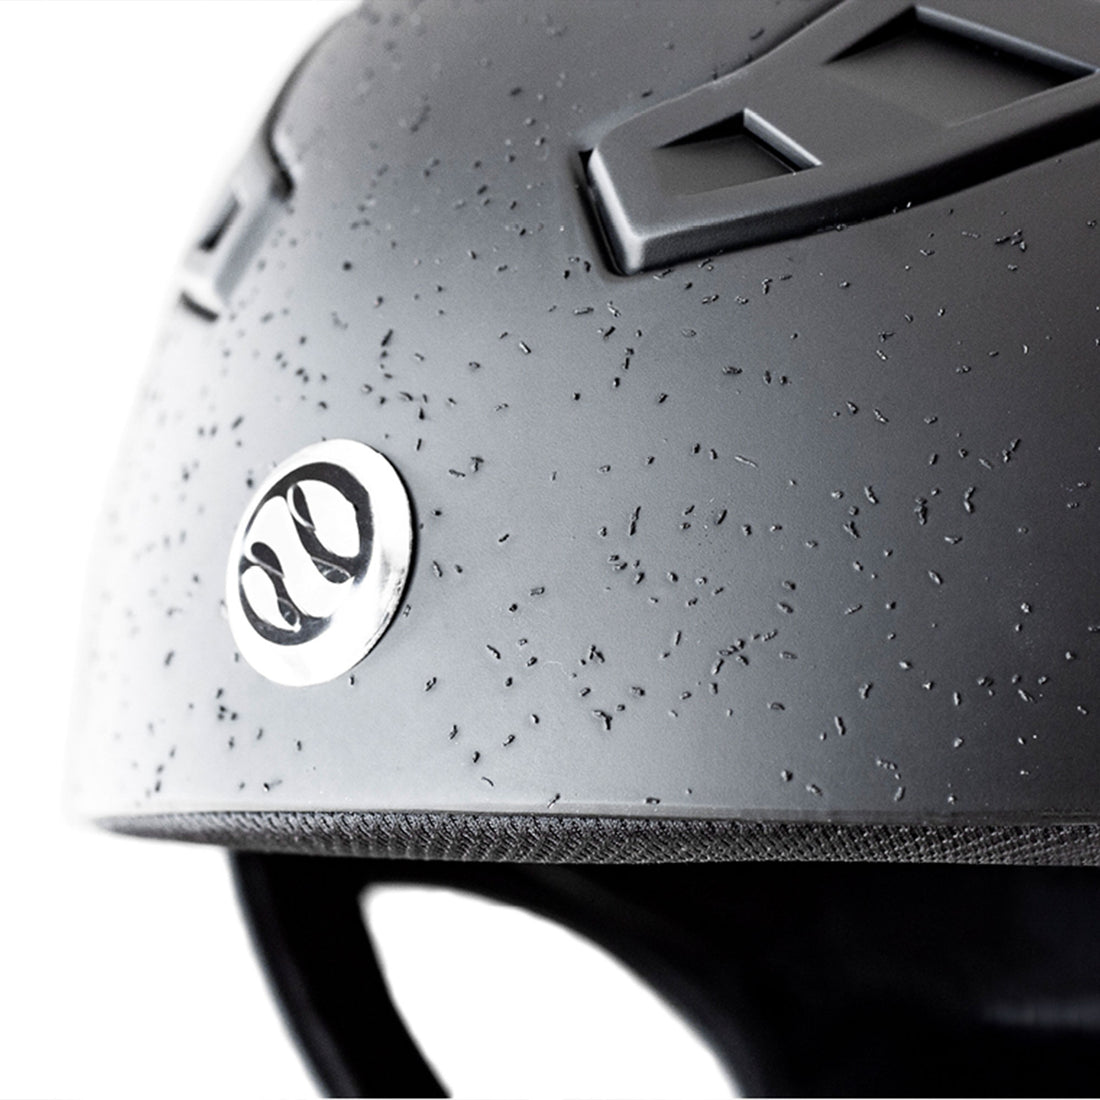 Lynx Eventing Field Competition Helmet